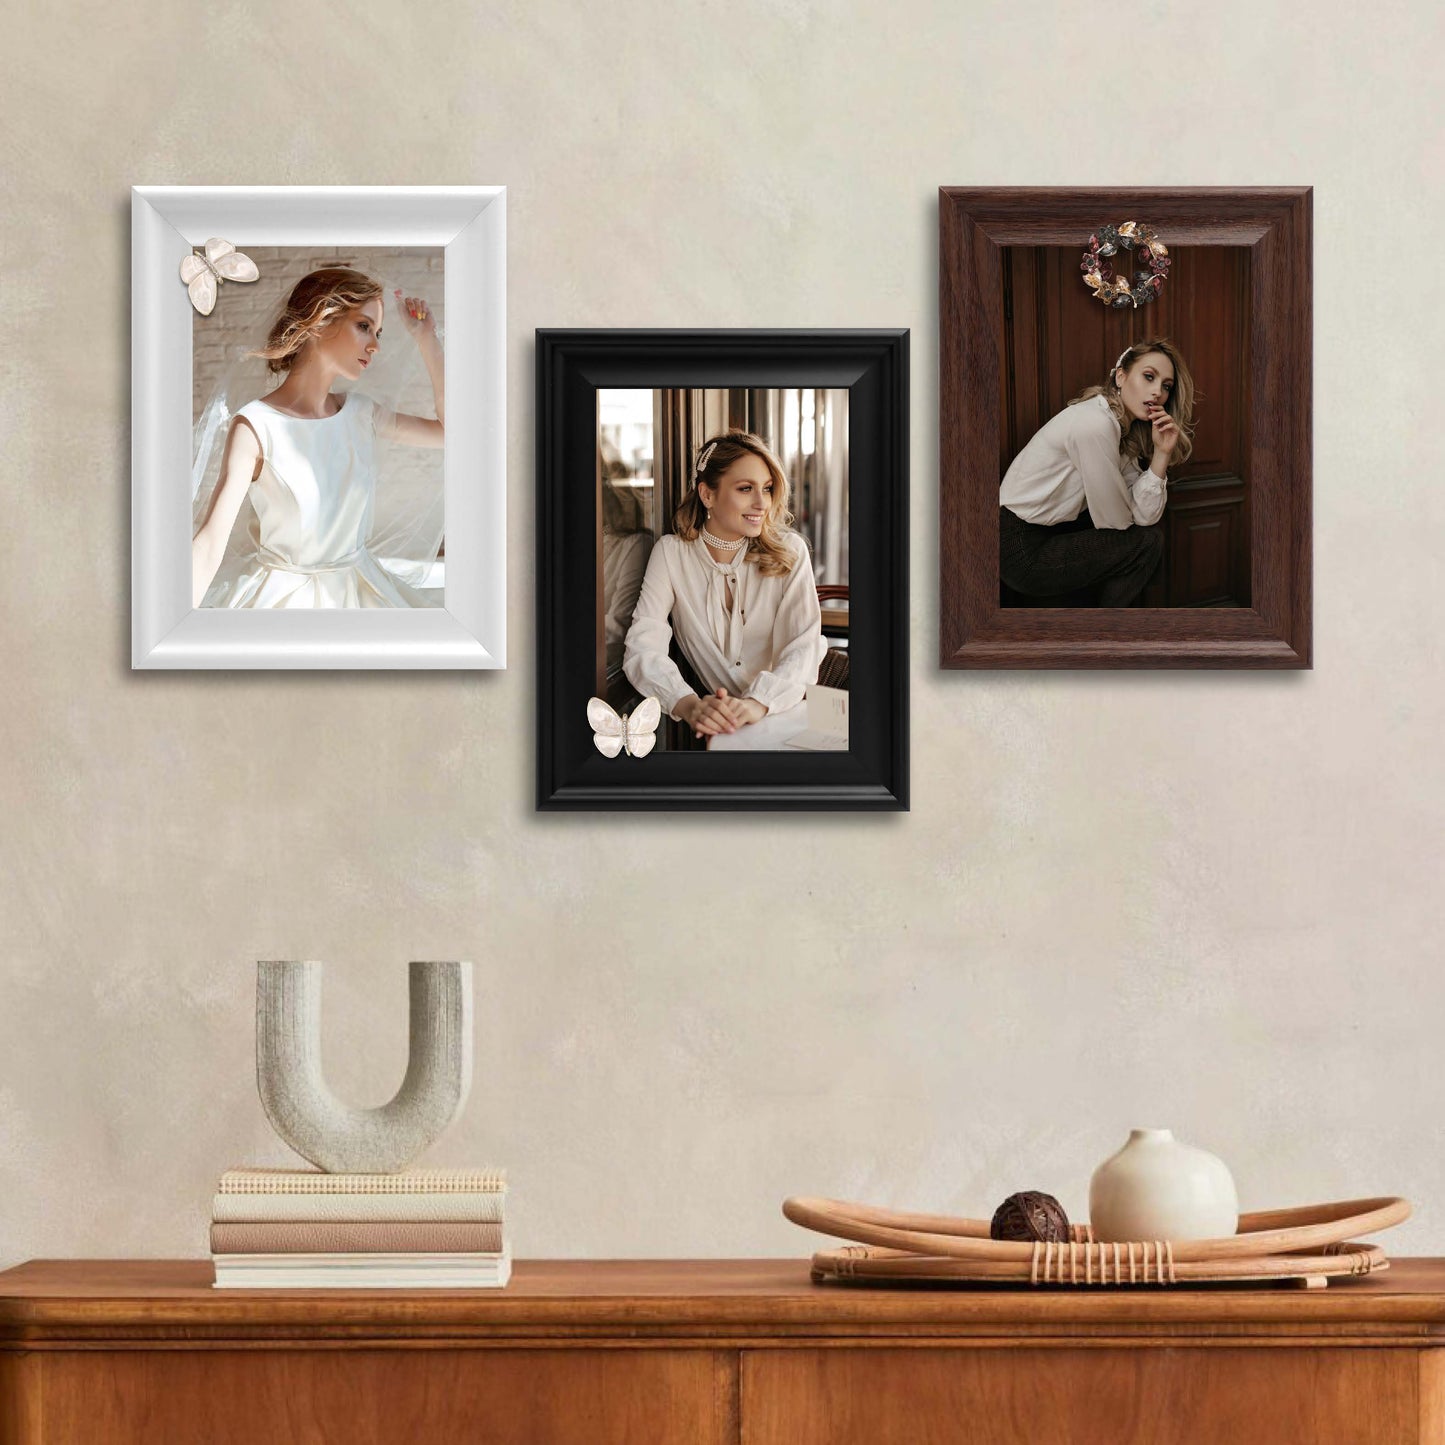 Dotride 5x7 Picture Frames with Decorations 3 Pack, Photo Frame with Detachable Butterflies and Wreaths Ornaments for Wall and Tabletop Display, Wooden Phoframe with Clear Plexiglass, Black White & Brown